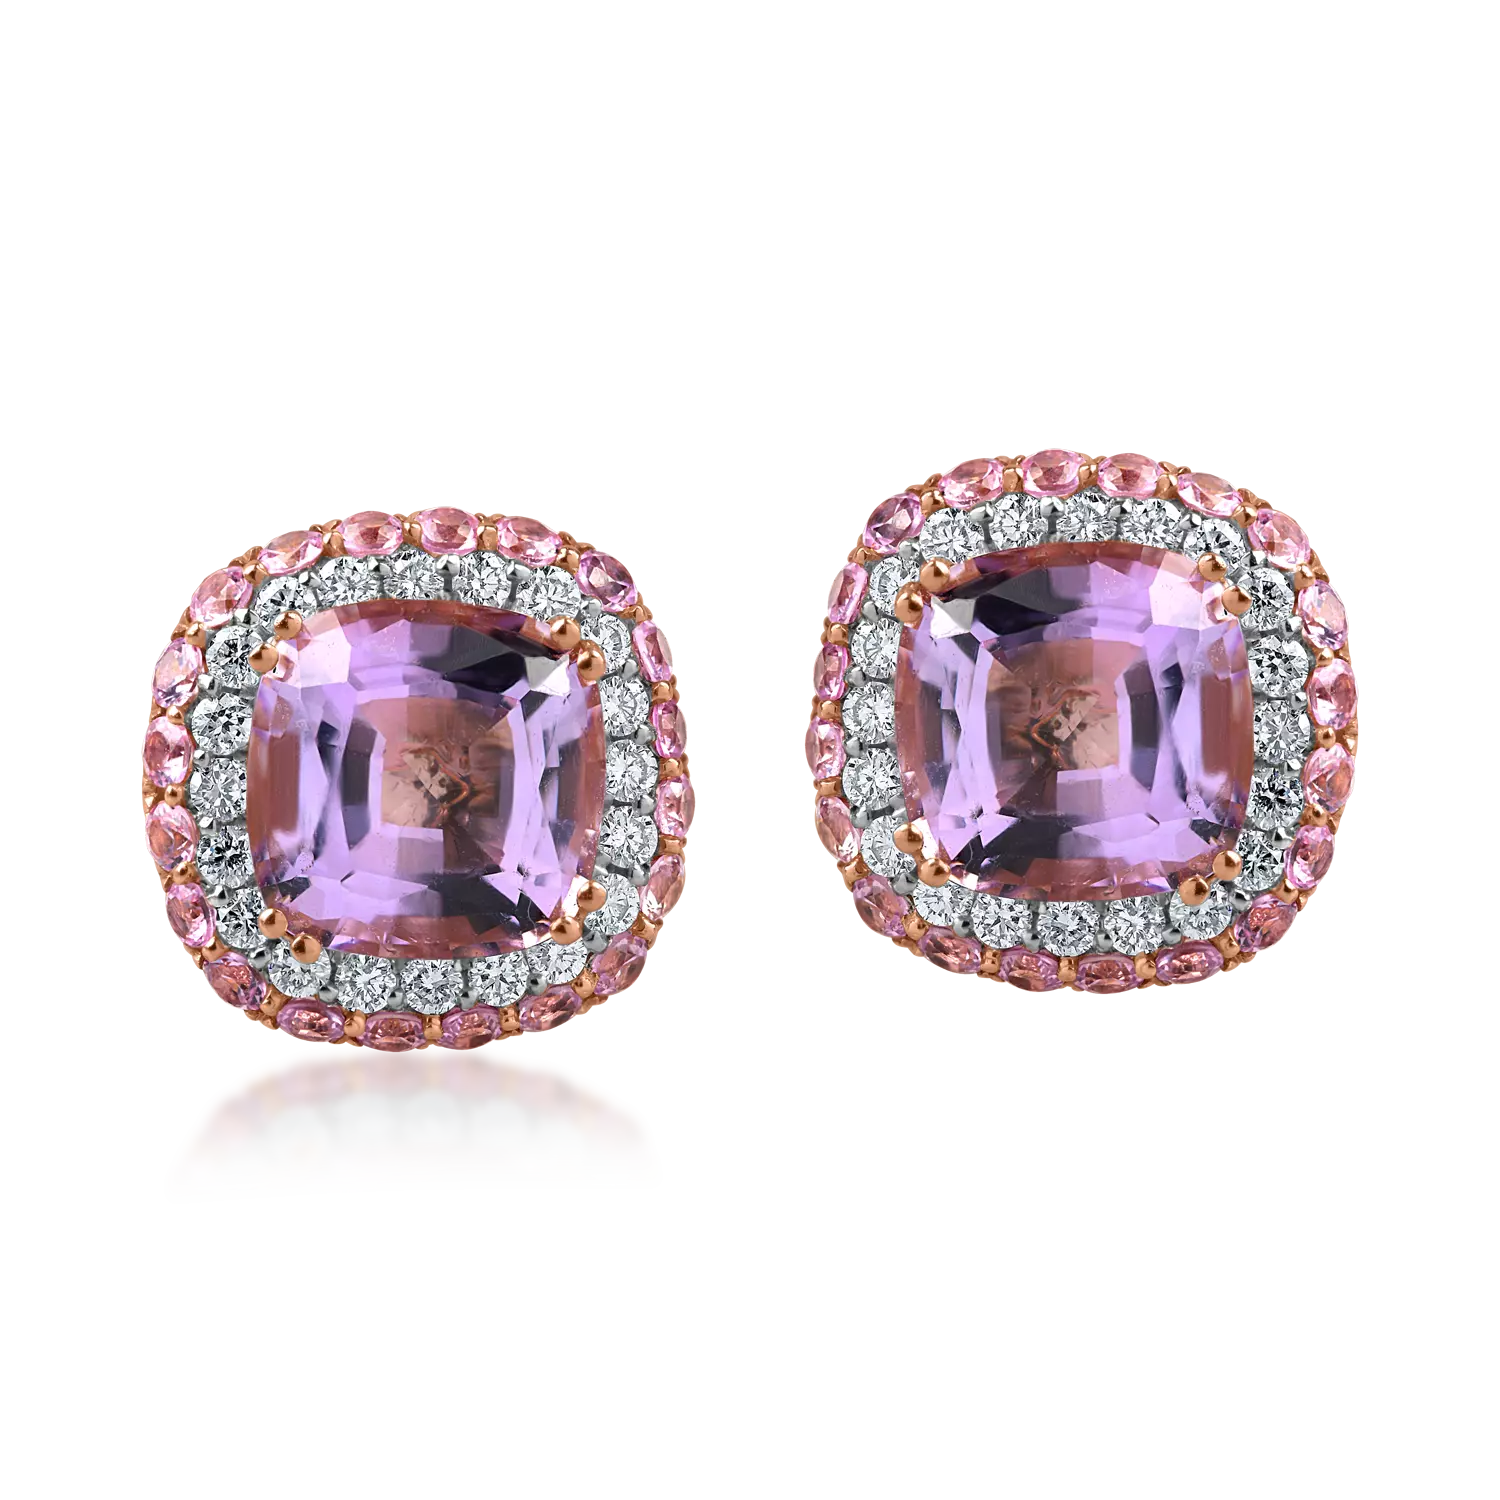 Rose gold earrings with 4.8ct amethysts and 0.9ct pink sapphires